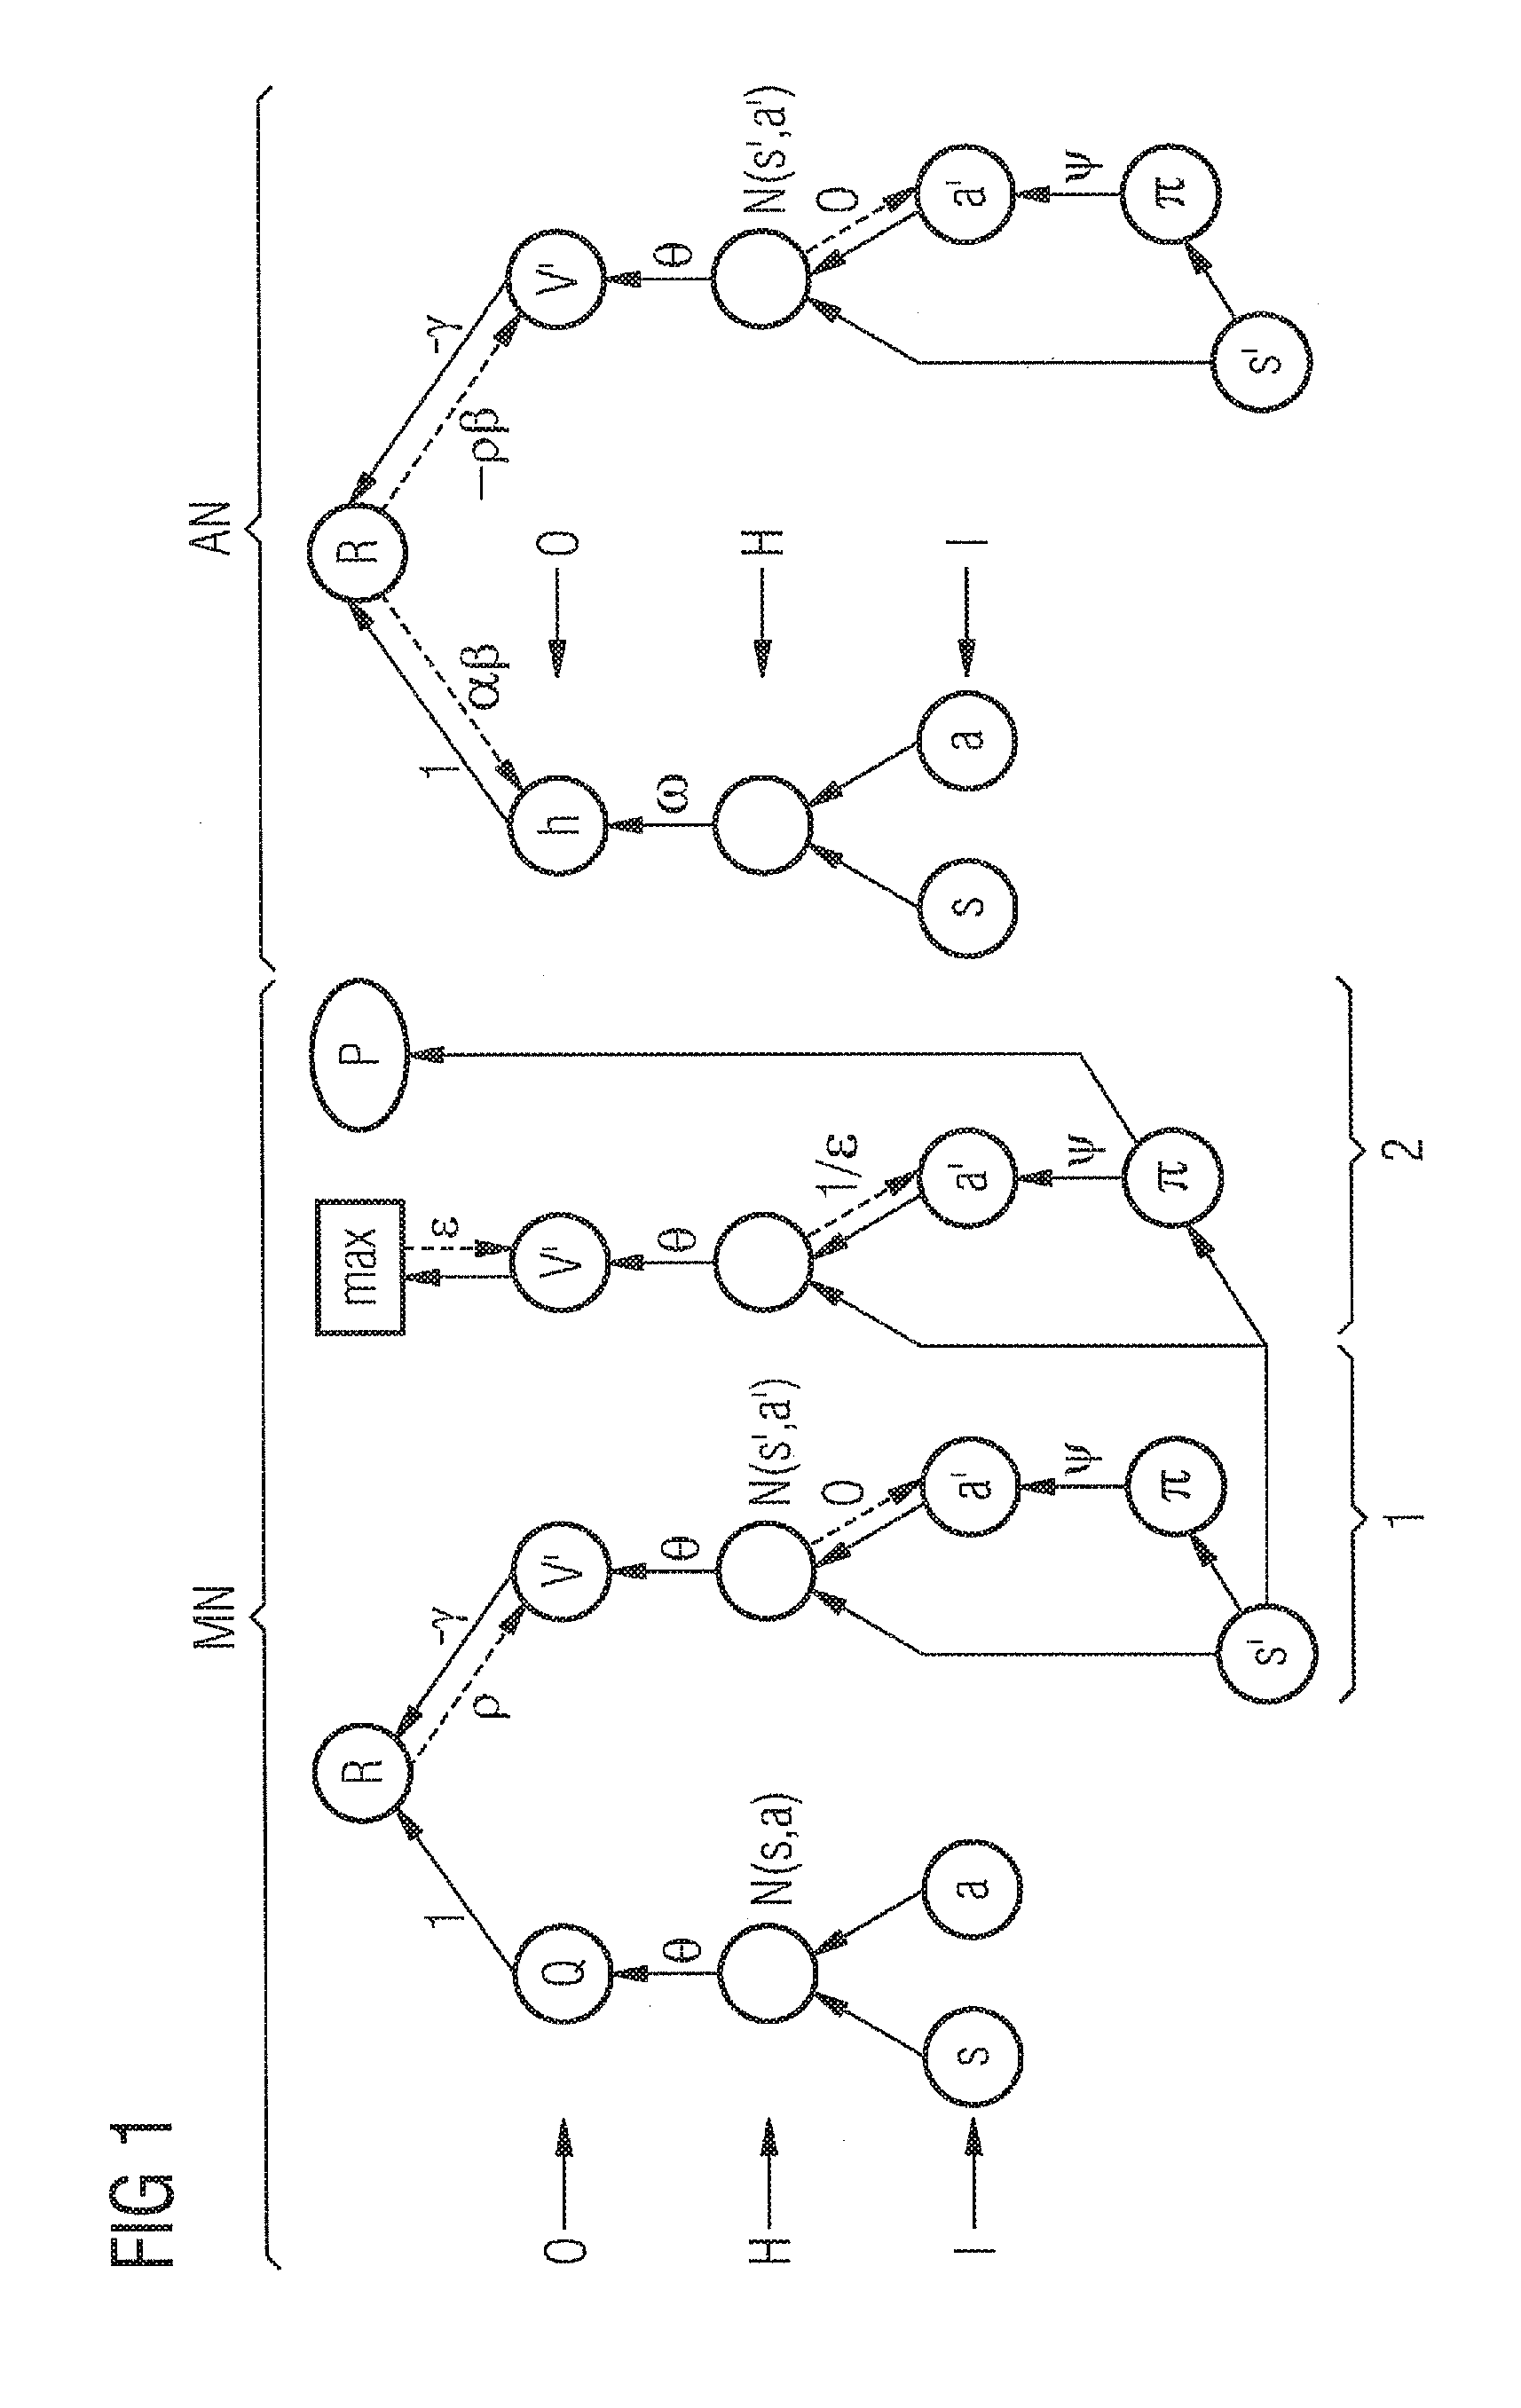 Method for computer-aided control and/or regulation using two neural networks wherein the second neural network models a quality function and can be used to control a gas turbine